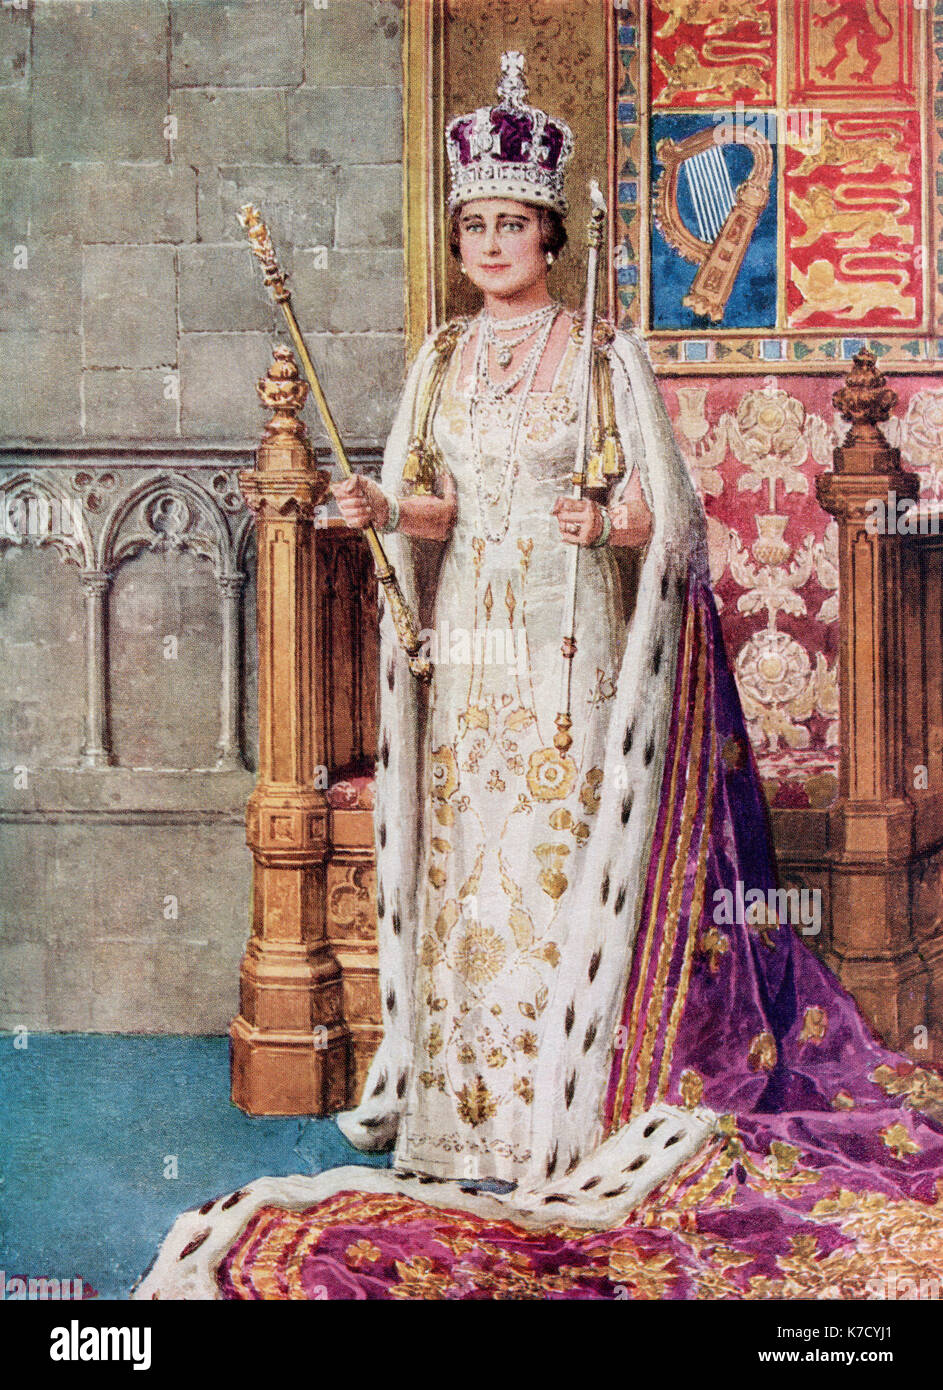 Queen Elizabeth in coronation robes, 1936.  Elizabeth Angela Marguerite Bowes-Lyon, 1900 – 2002.  Wife of King George VI and mother of Queen Elizabeth II.  From The Coronation Book of King George VI and Queen Elizabeth, published 1937. Stock Photo